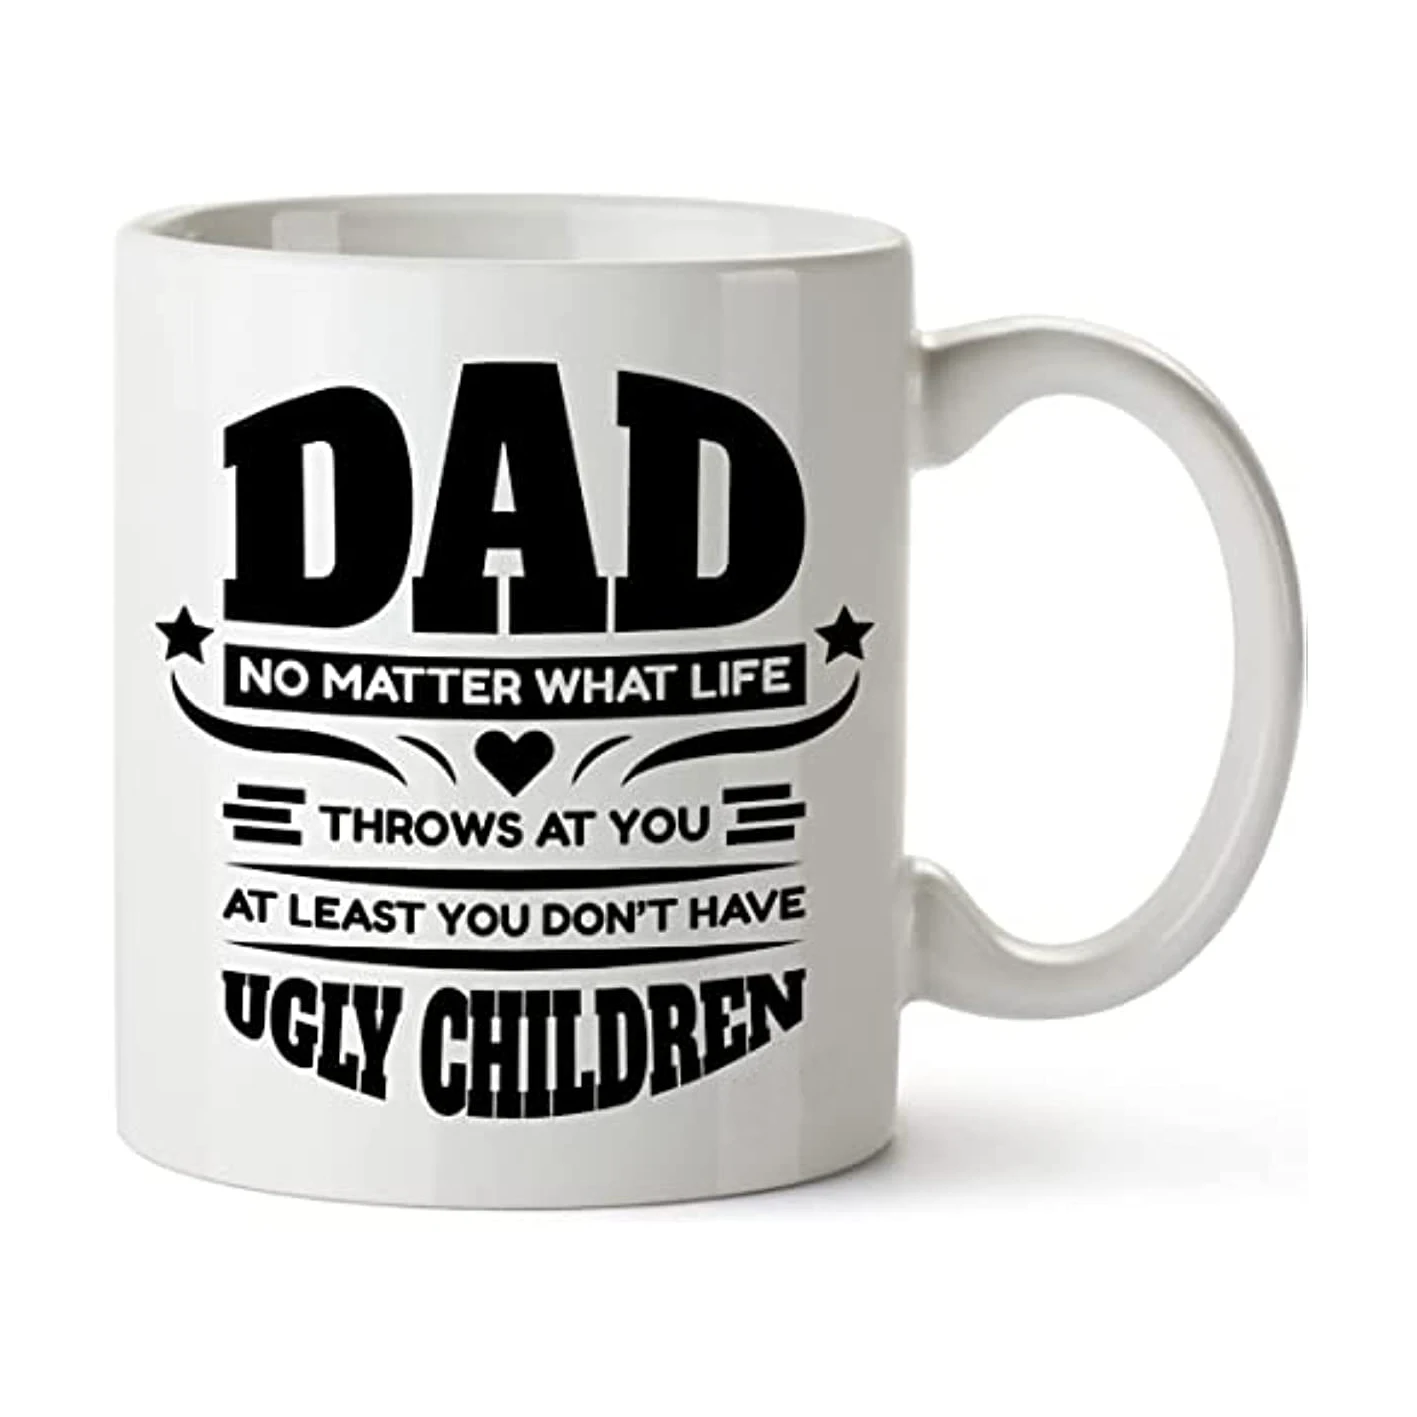 

Dad Matter What Life Throws At You At Least You Don't Have Ugly Children Dad Gifts From Daughter Son for Father Day Coffee Mugs